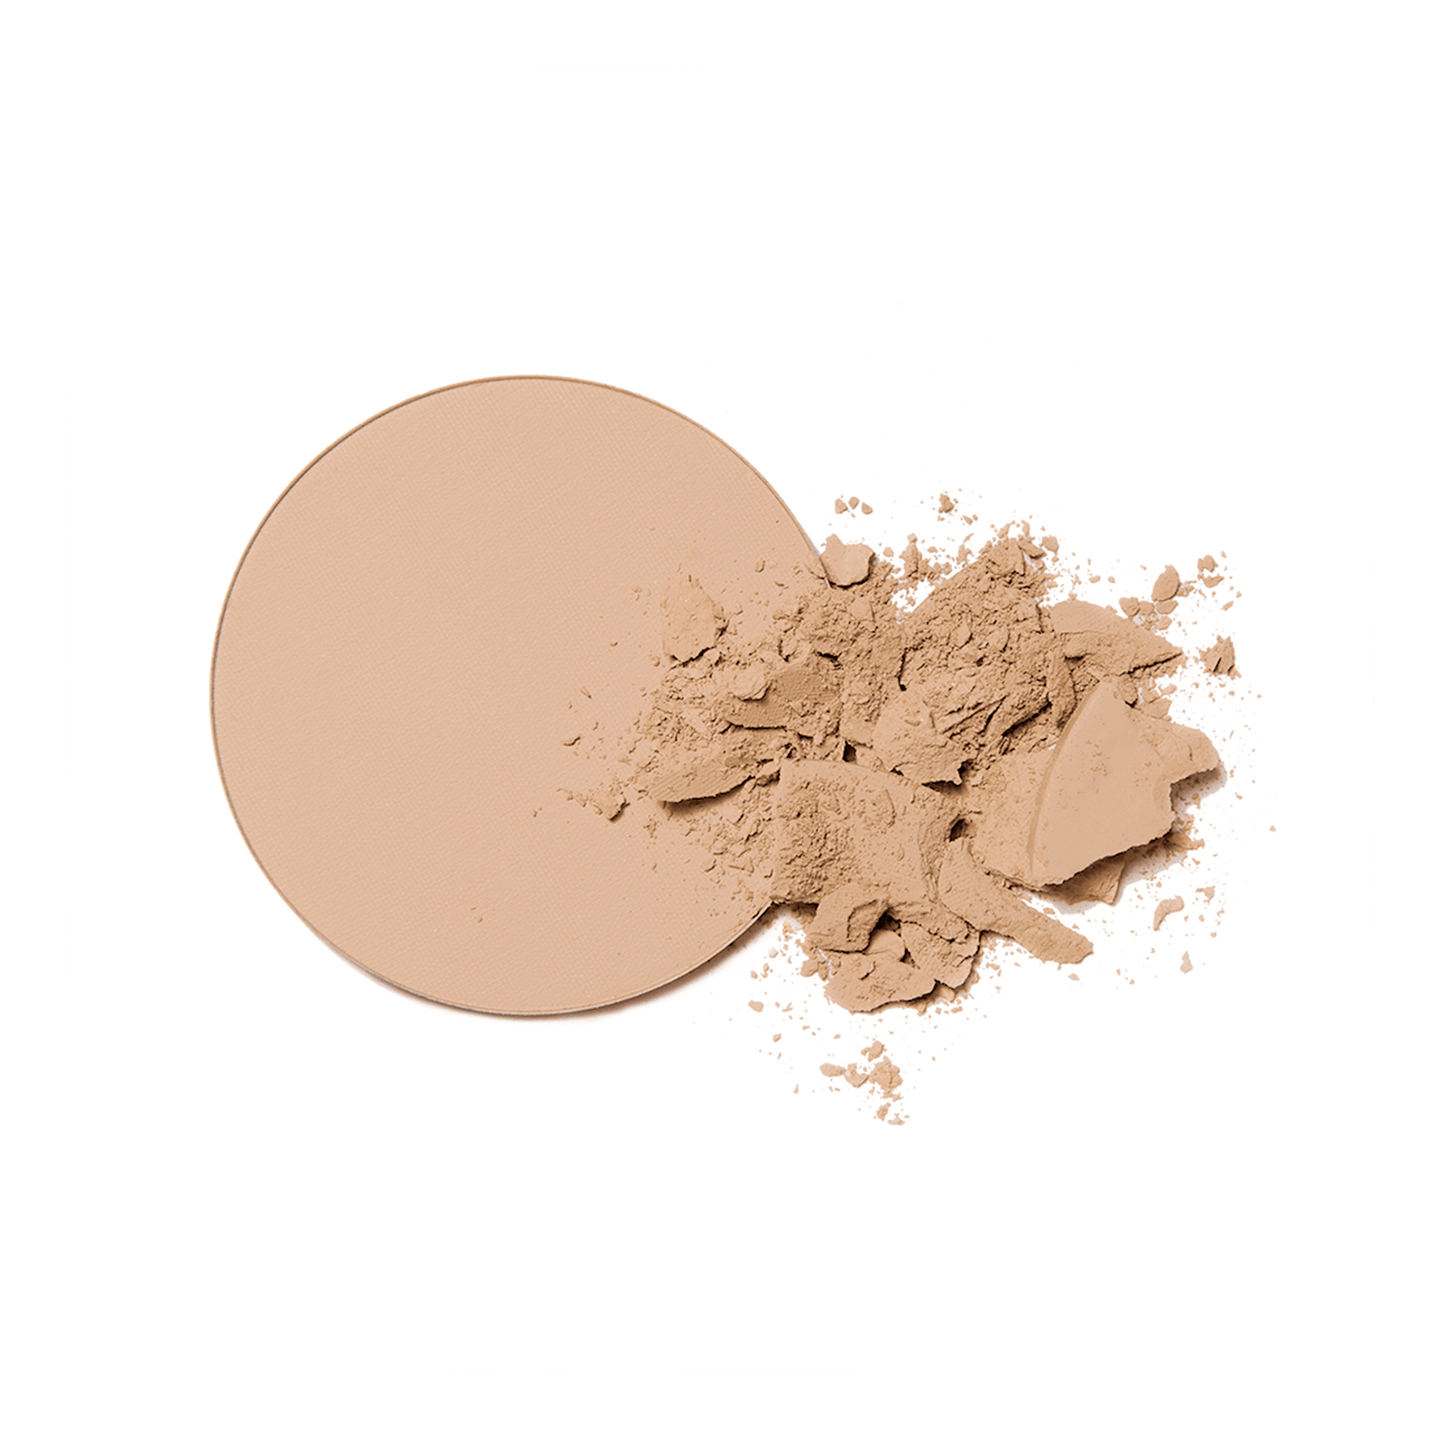 Baked Mineral Foundation - Unity